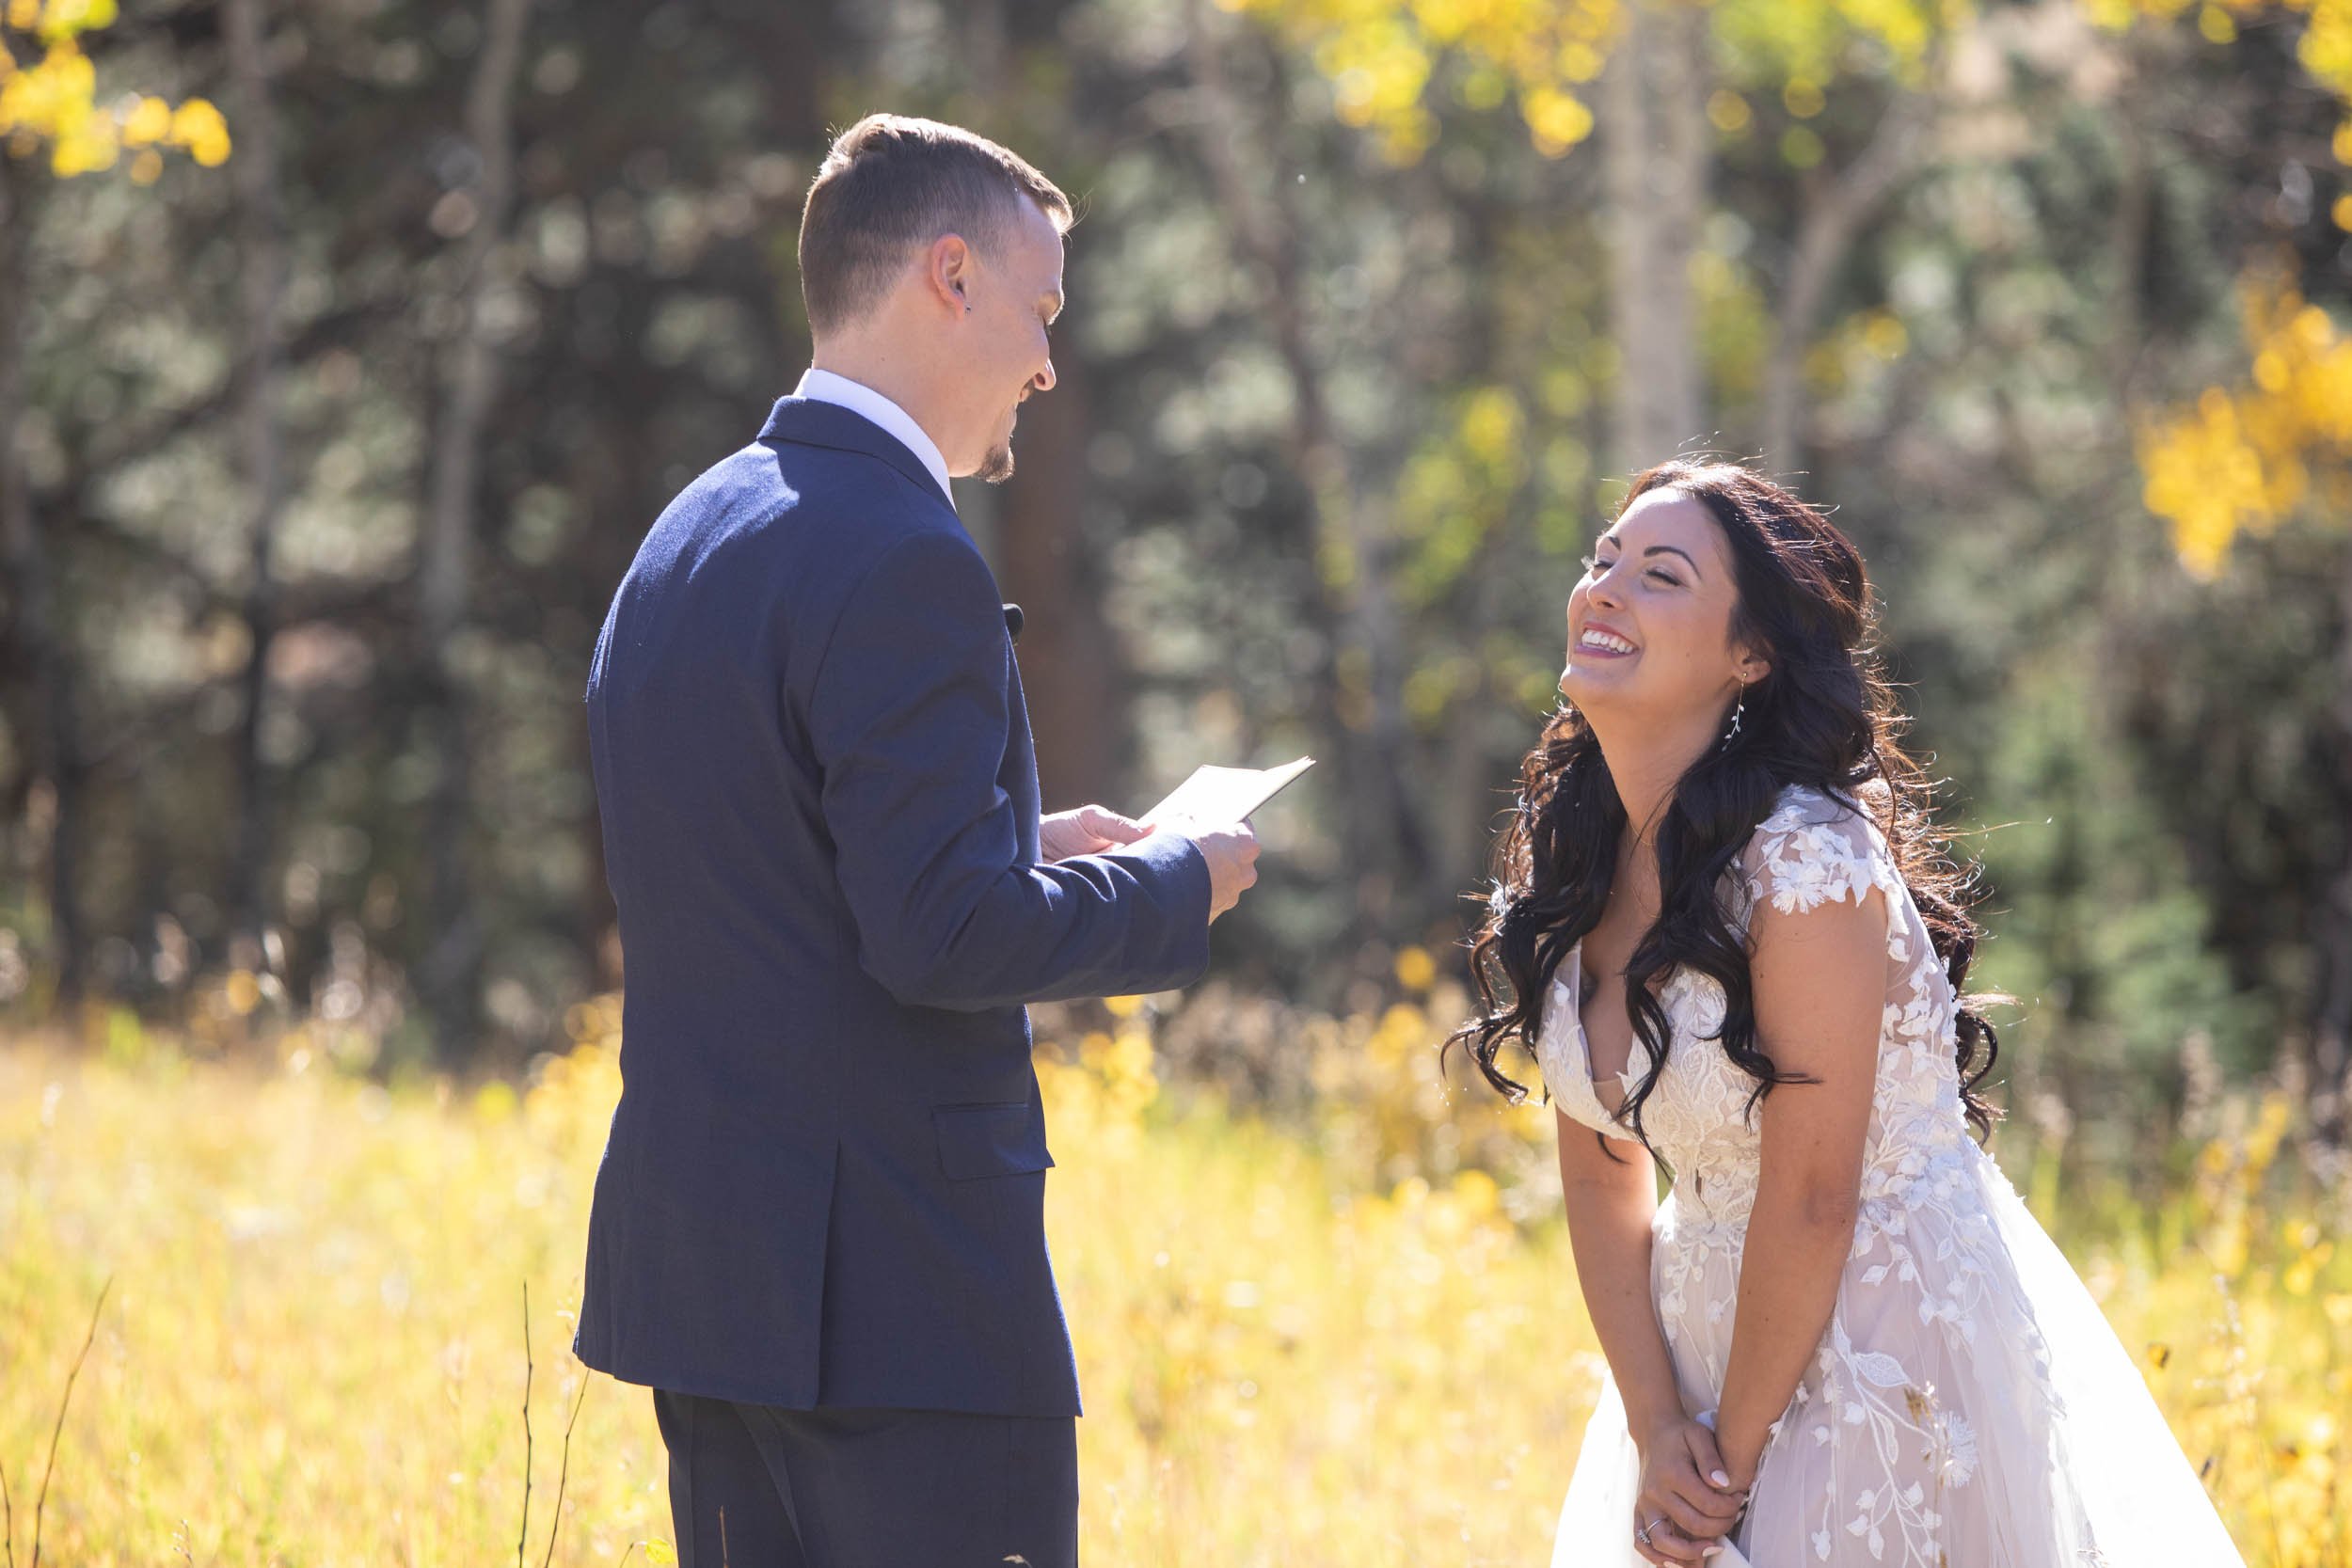 Reading Vows in the yellow fall leaves at Deer Creek Valley Ranch